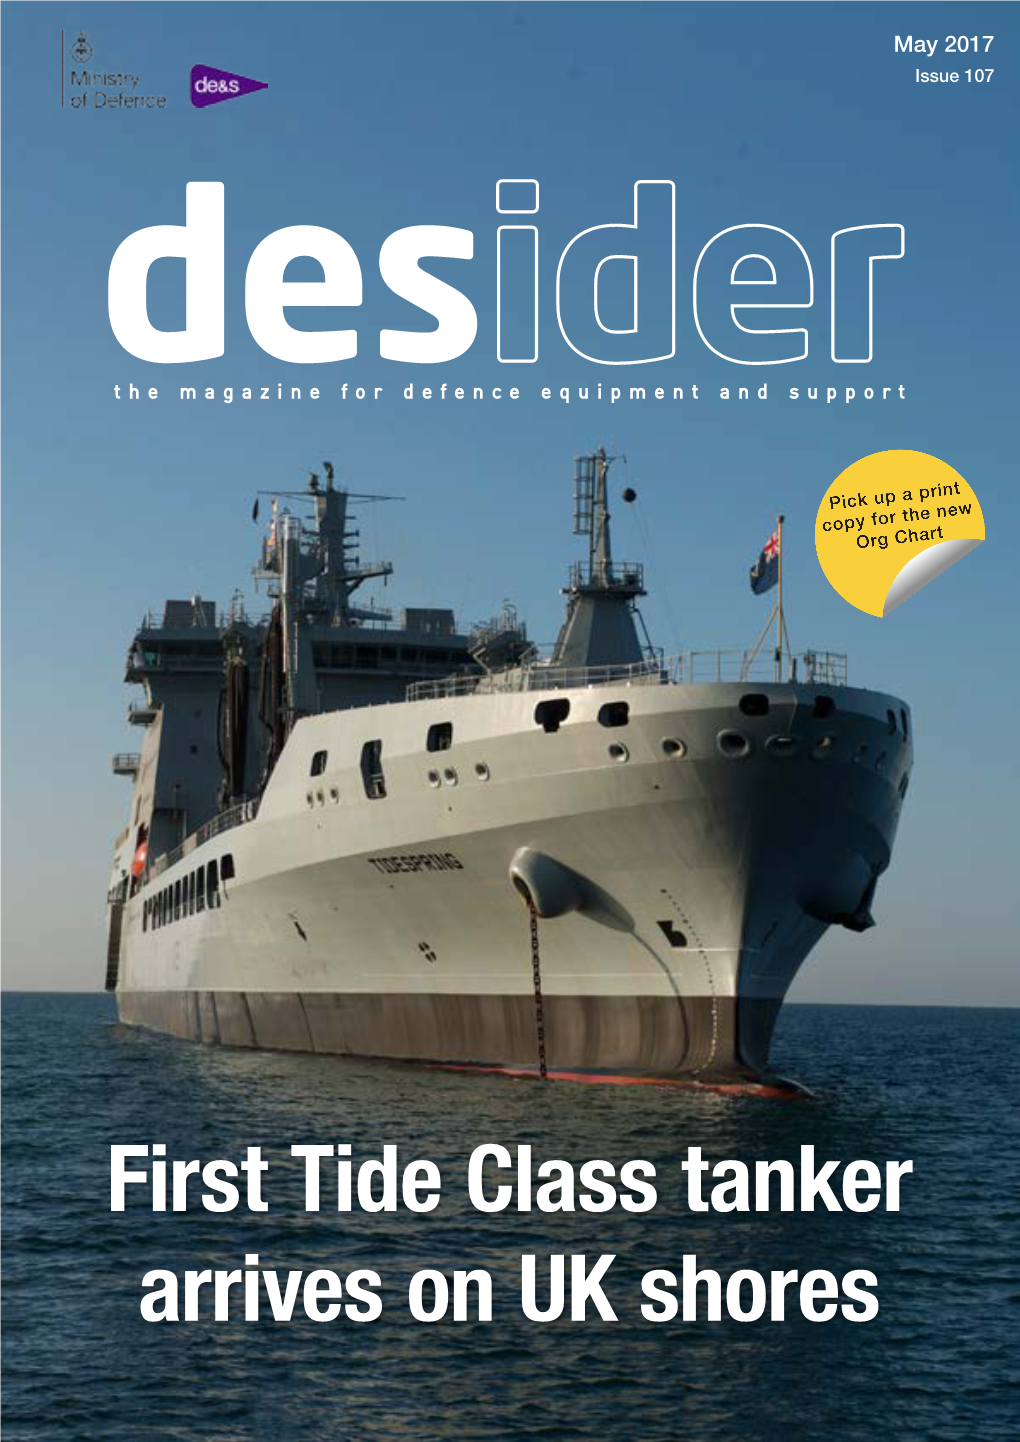 Desider: Issue 107, May 2017